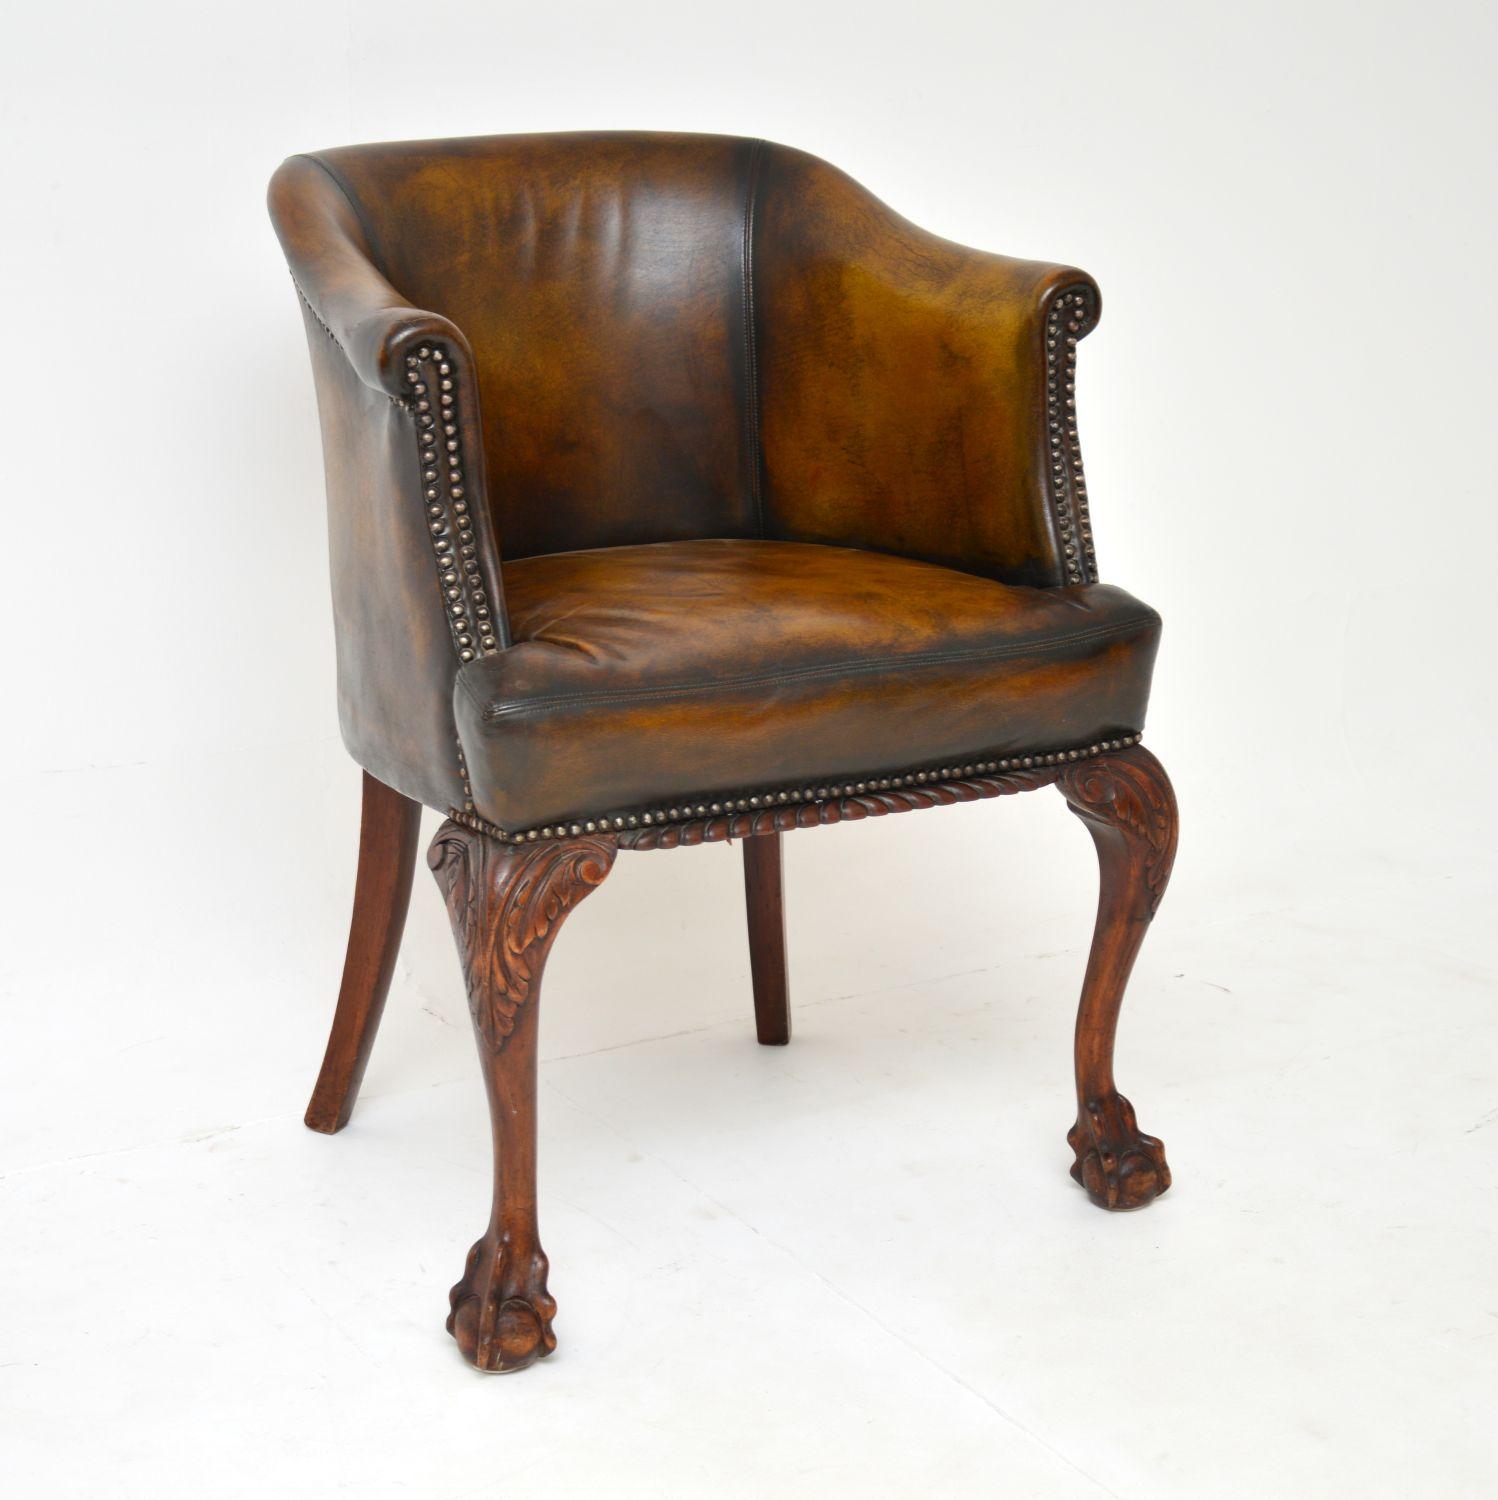 A fantastic antique leather armchair in the Chippendale style. This was made in England, it dates from around the 1900-1920 period.

It is of amazing quality, with a very comfortable and good looking design. The leather tub seat sits on cabriole